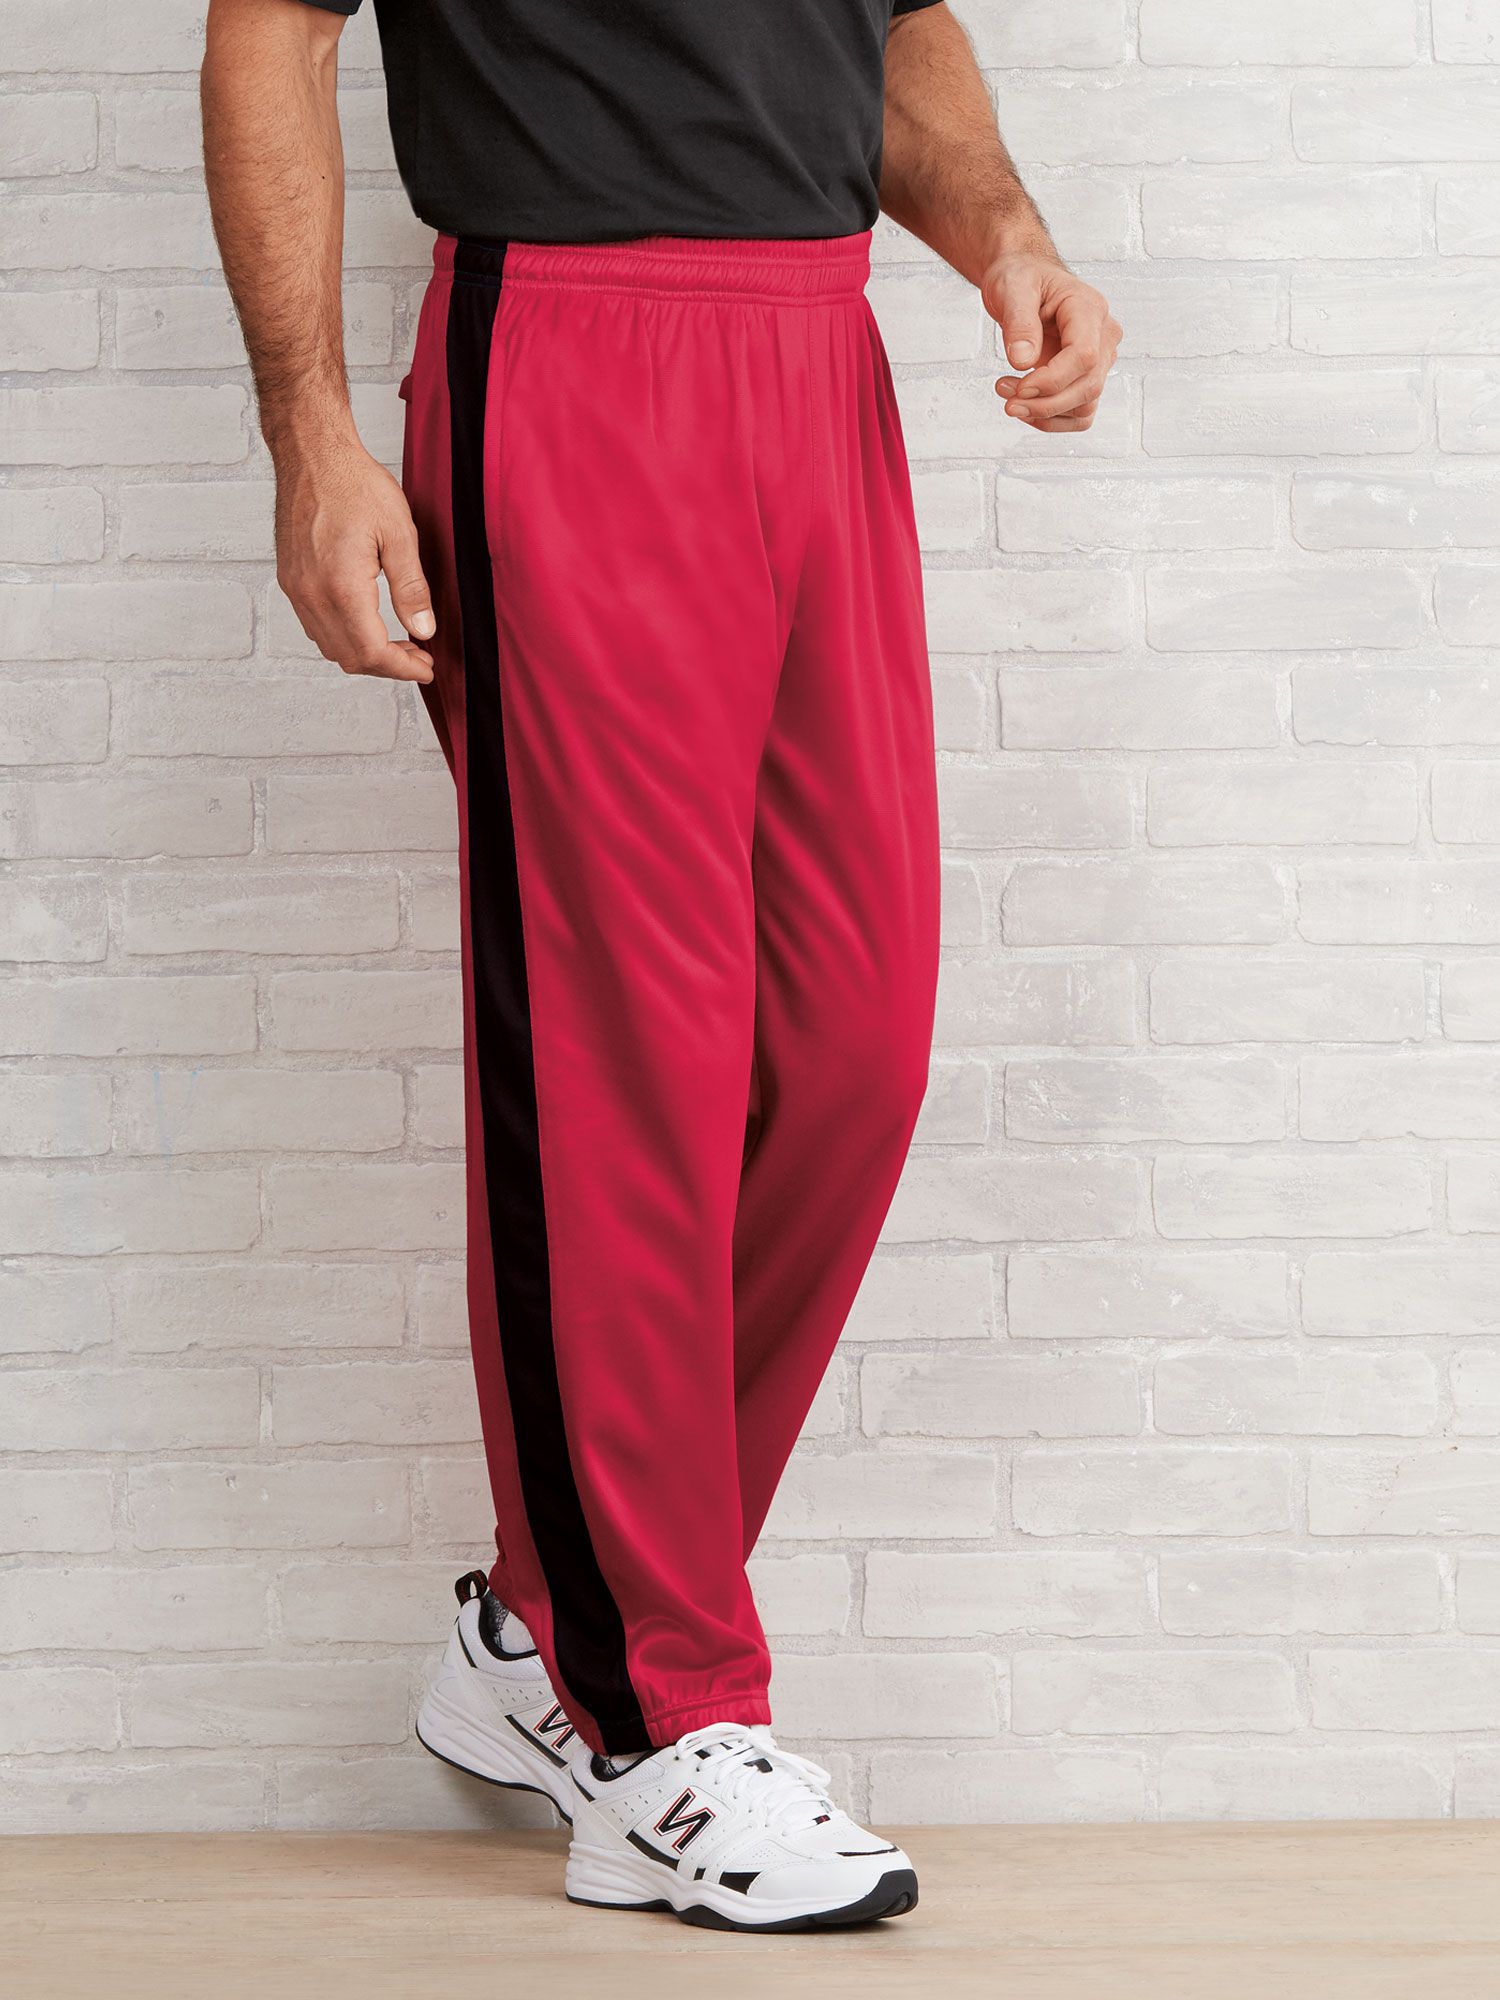 ainr Men Loose Warm Active Running Trousers Casual Pants